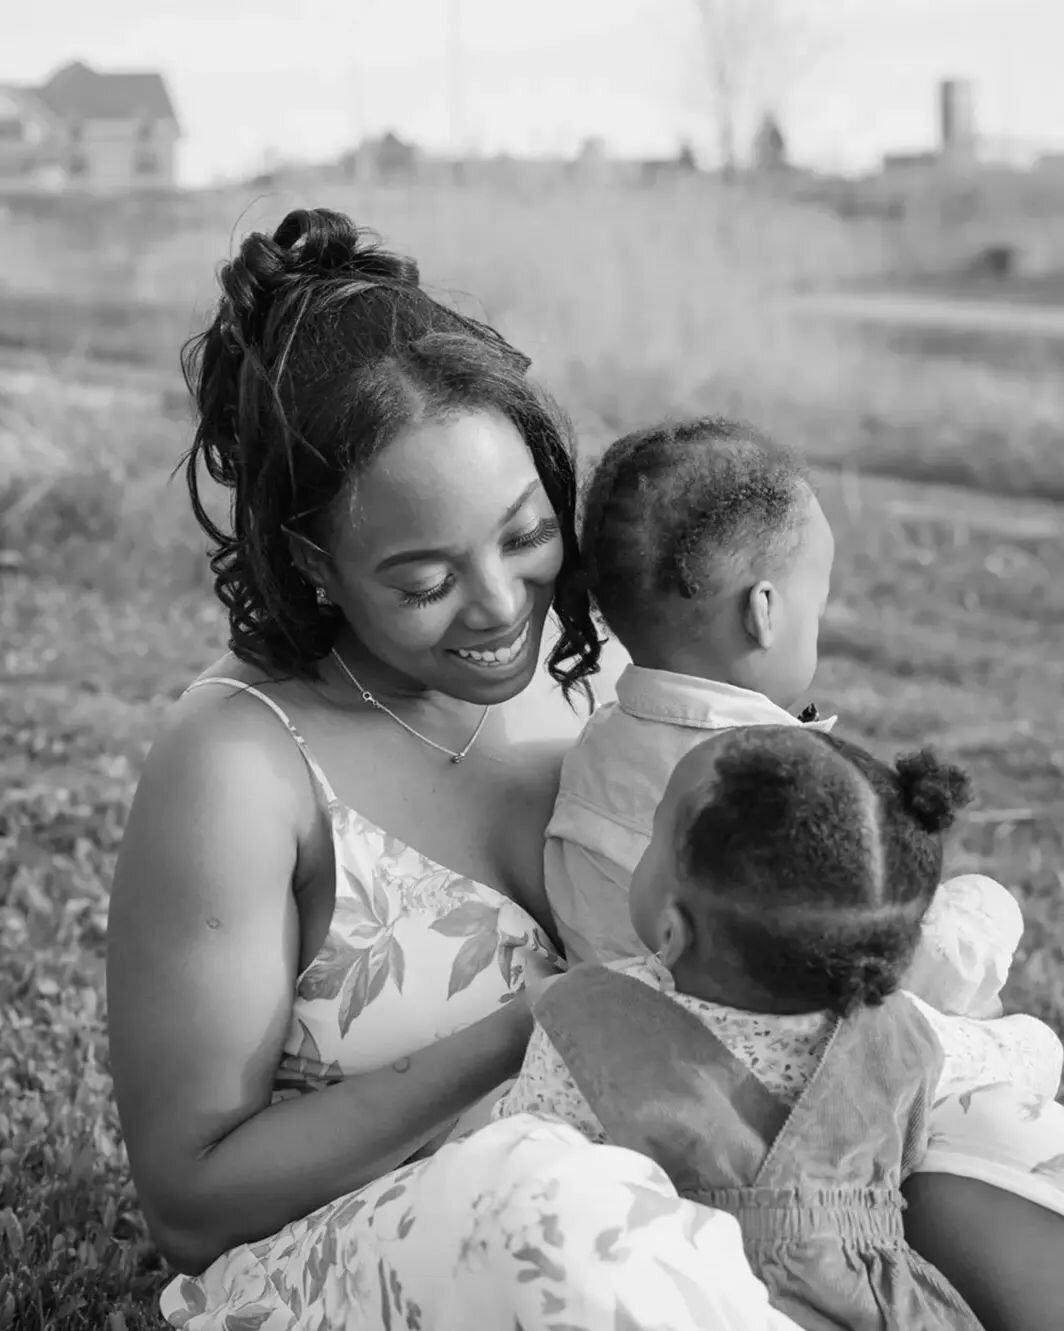 Happy mother's day to all you AMAZING moms🤍
This mama+me session from last week was just too fitting for the occasion